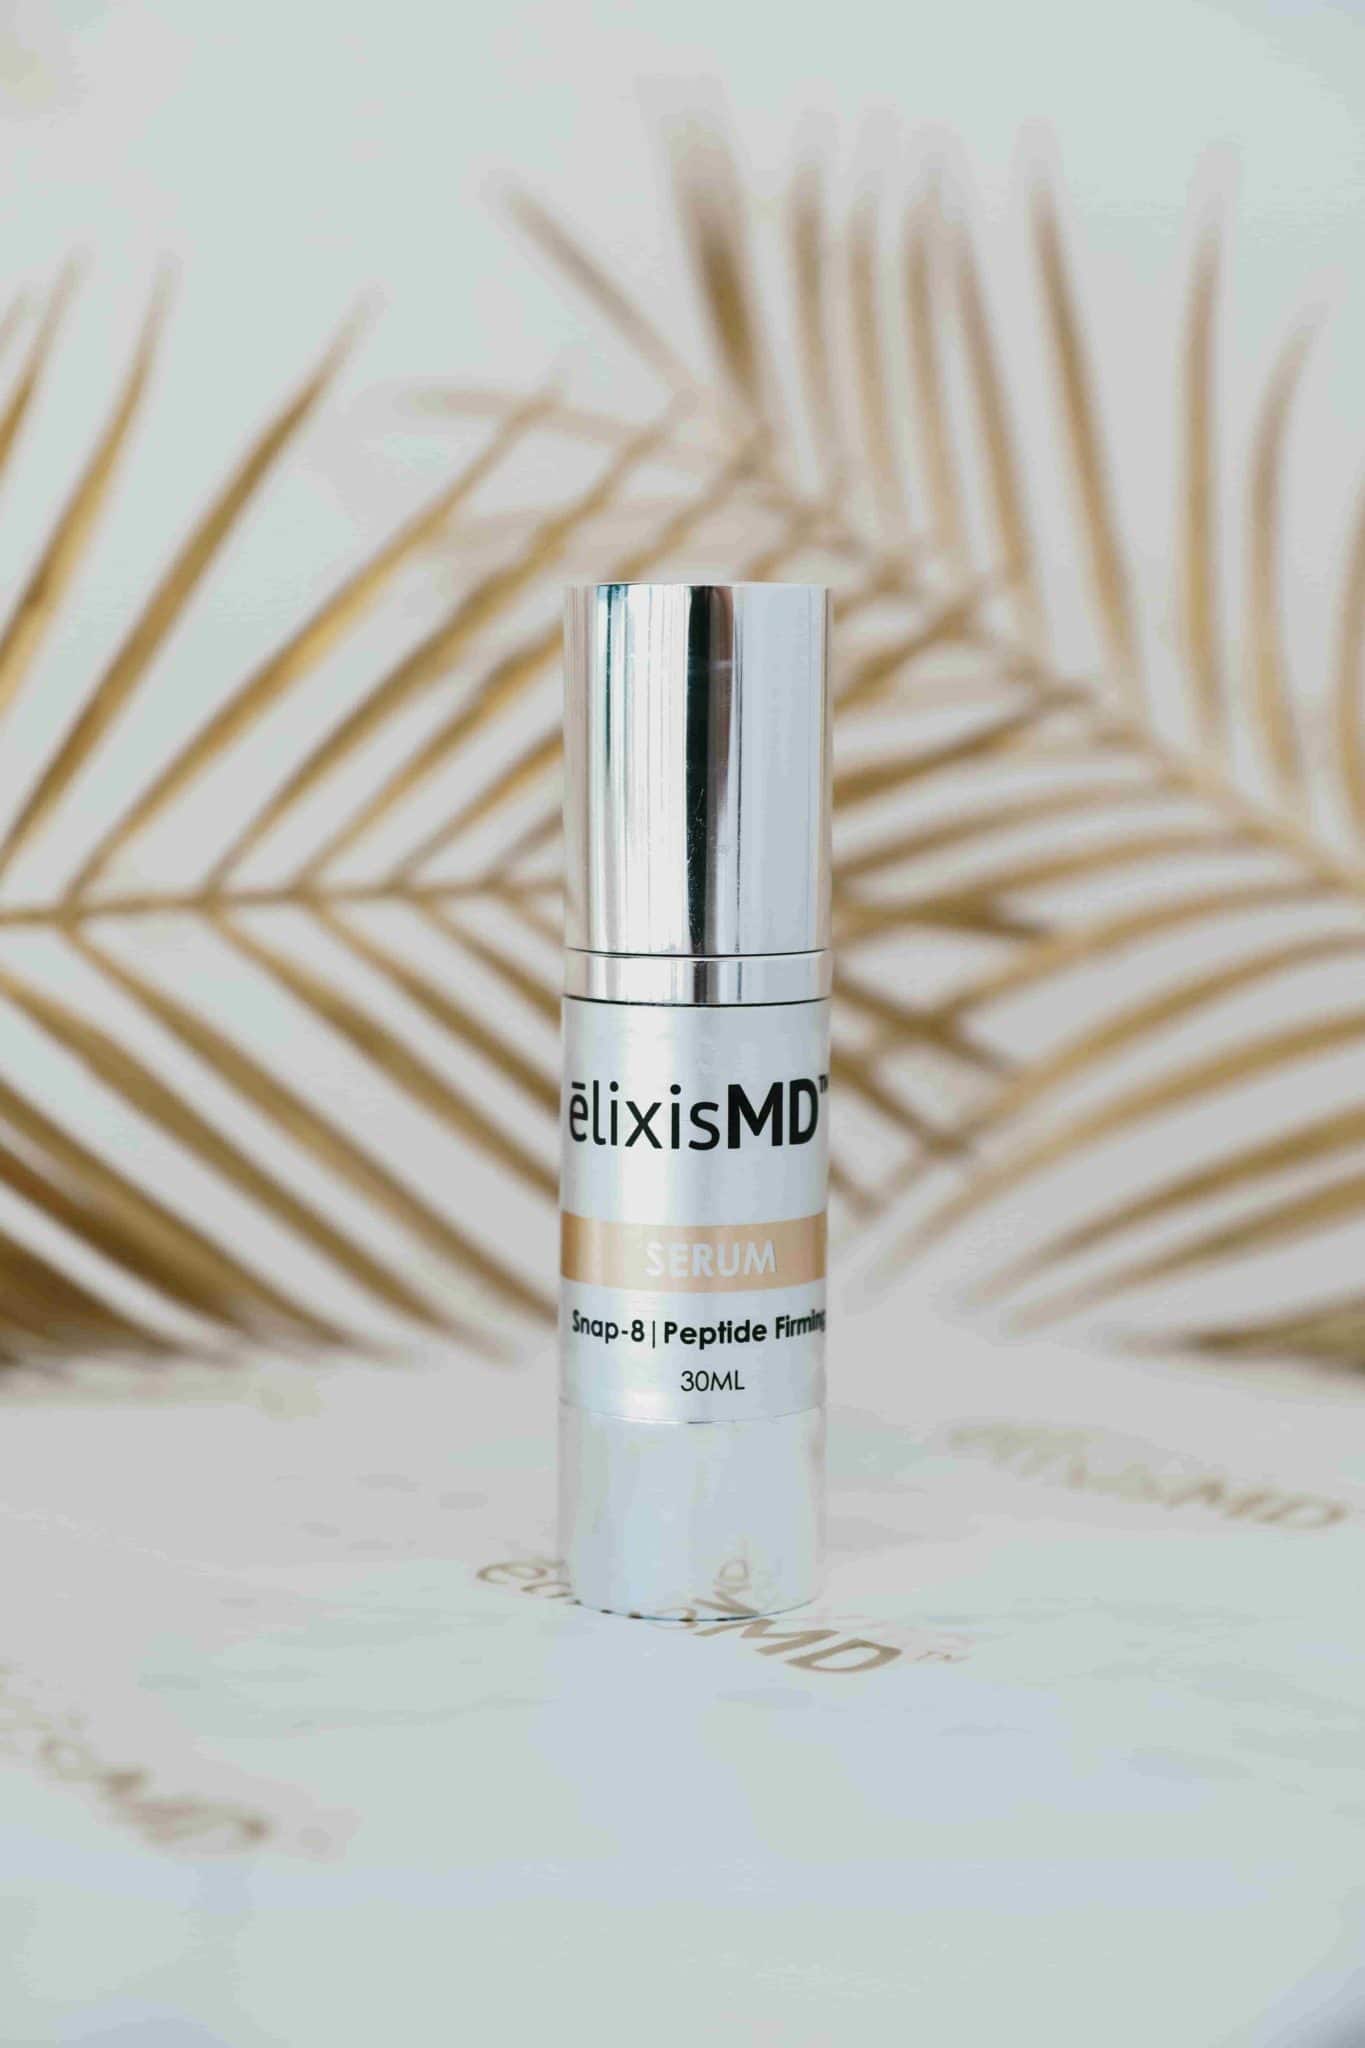 Snap-8 | Peptide Firming